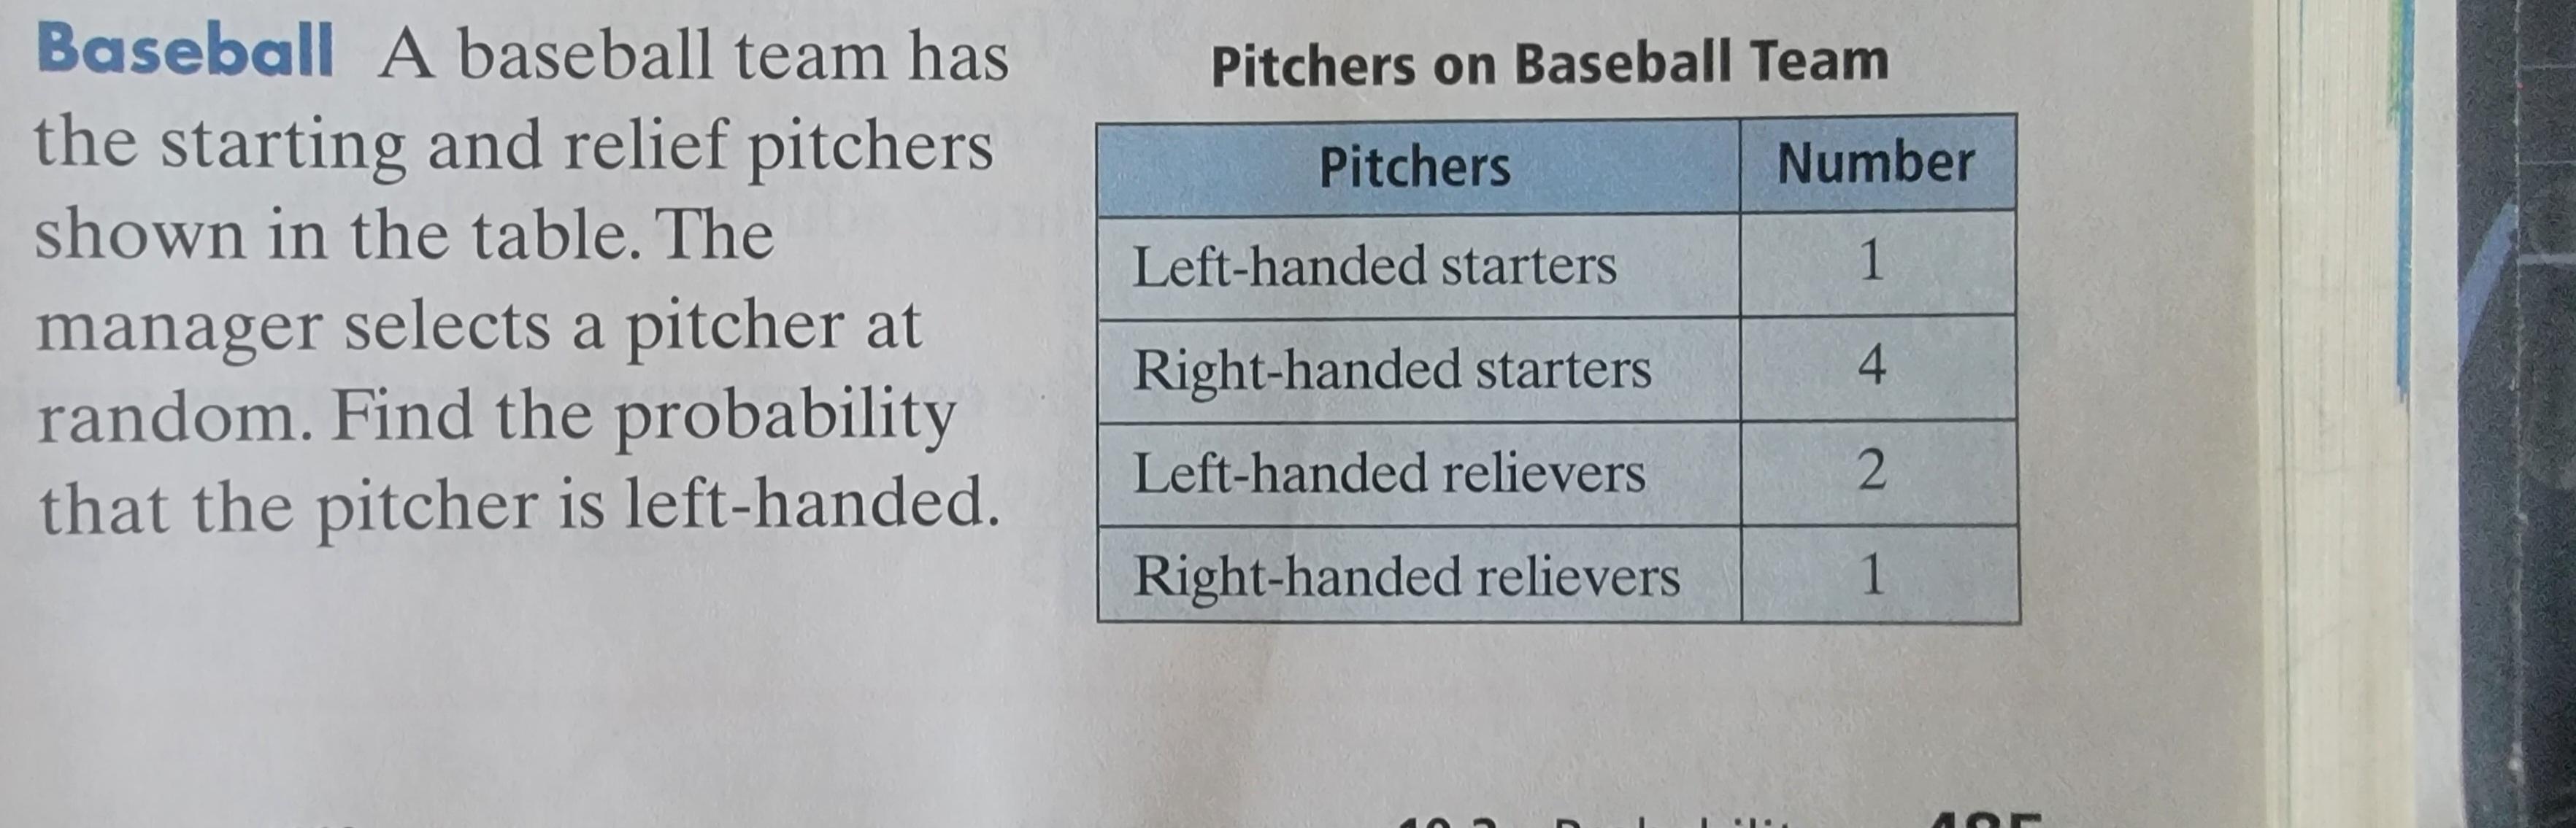 A Baseball Team Has The Starting And Relief Pitchers Shown In The Table. The Manager Selects A Pitcher